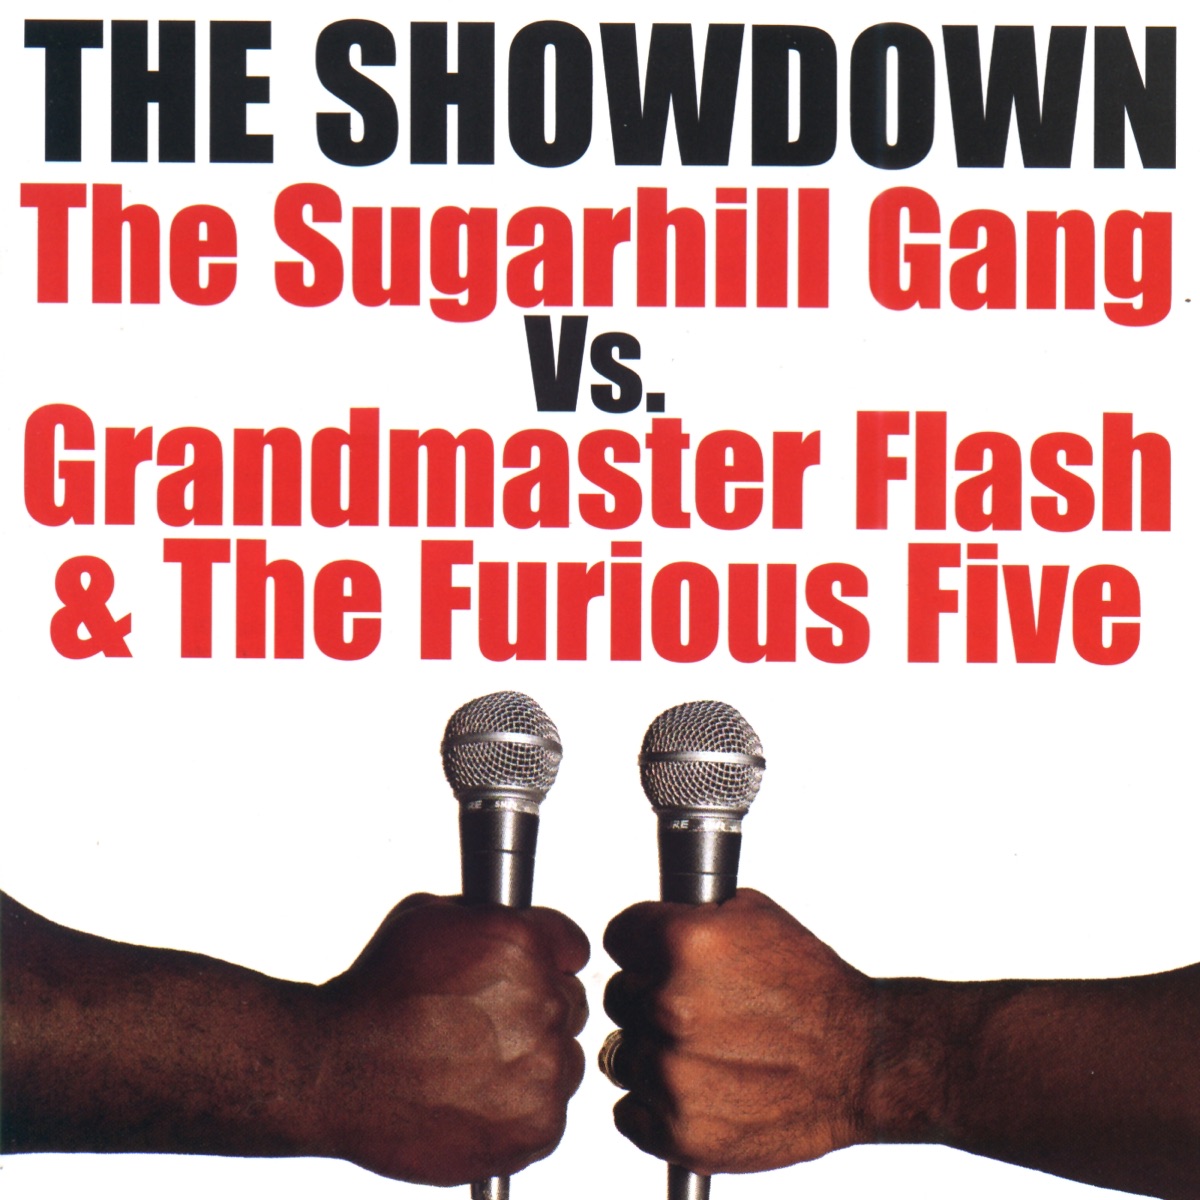 Hits — Grandmaster Flash and The Furious Five